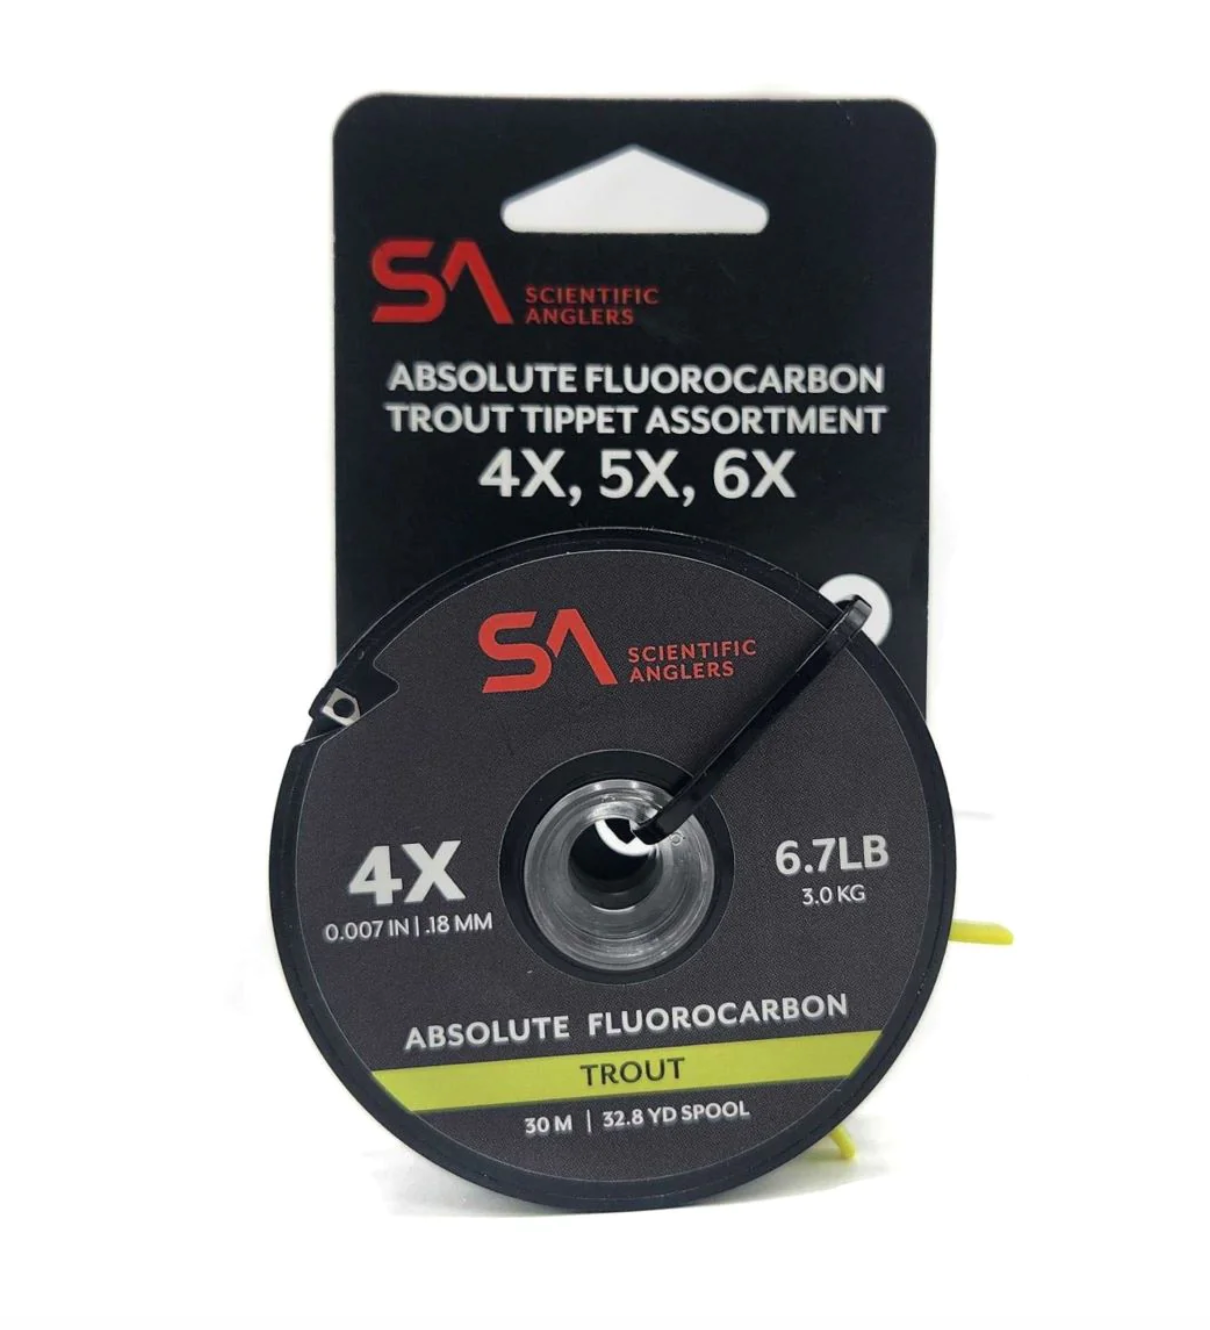 Scientific Anglers Absolute Fluorocarbon Trout Tippet Assortment - 4X-6X